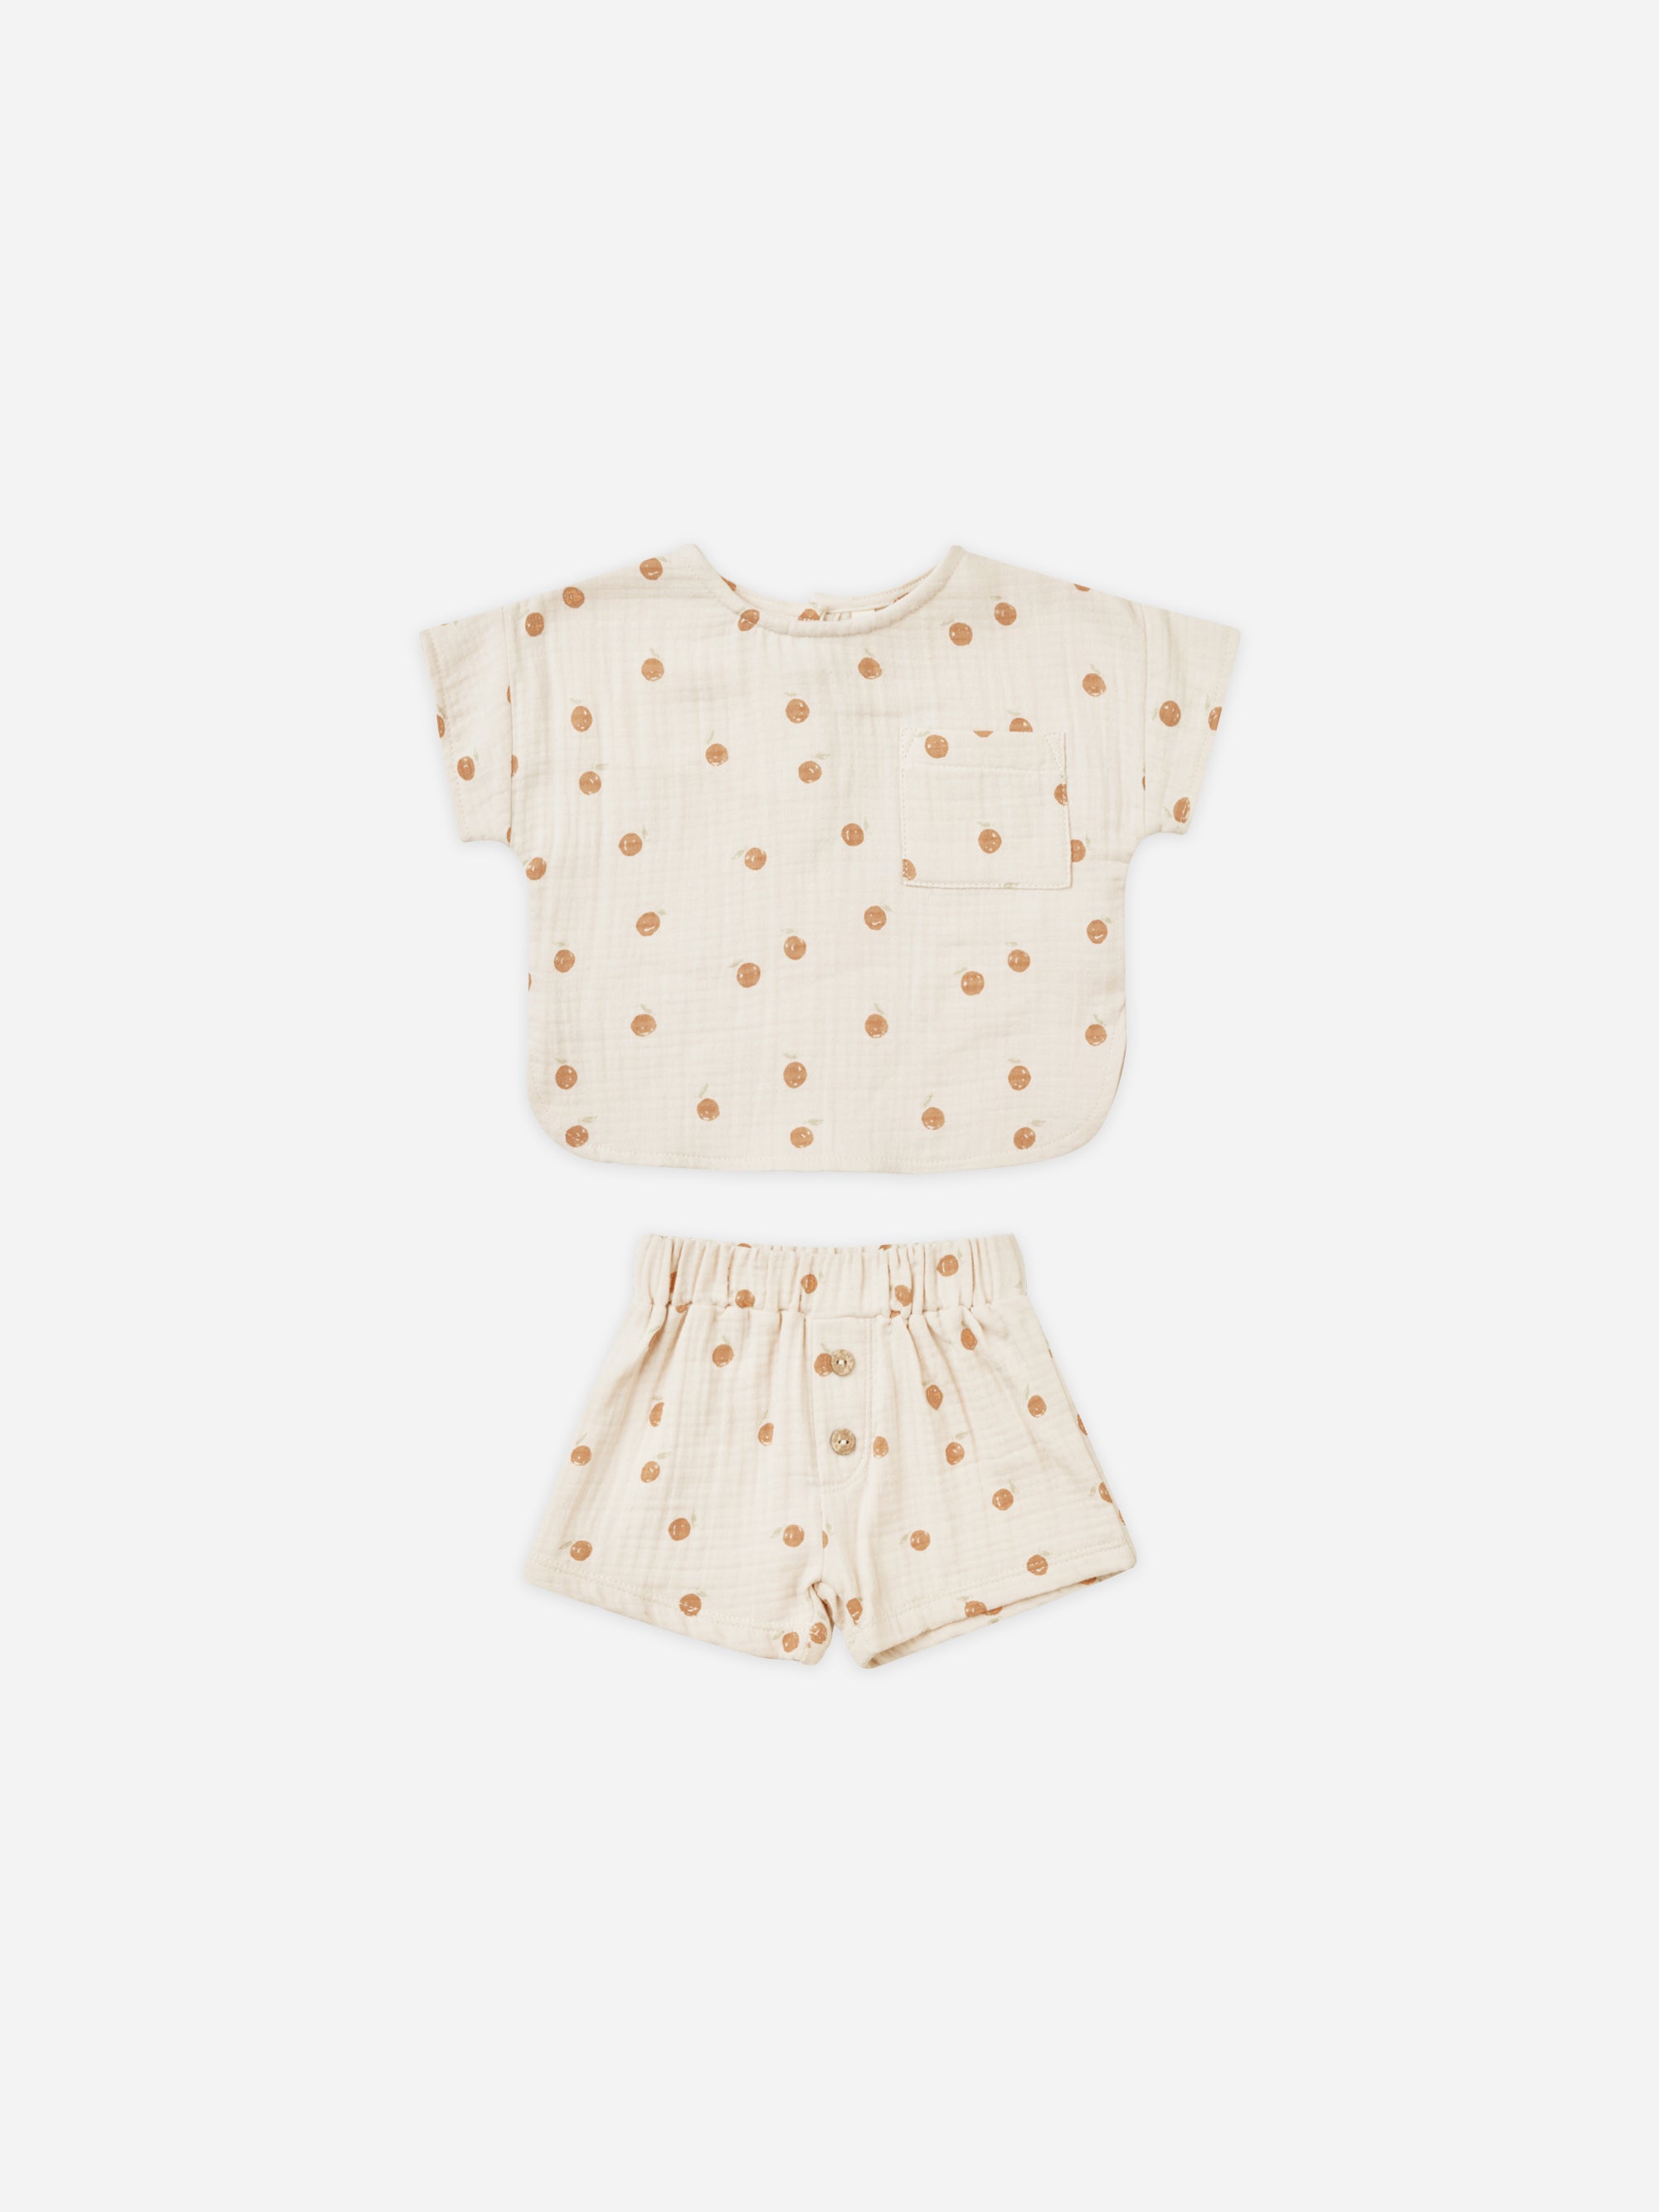 Woven Boxy Top + Short Set || Oranges - Rylee + Cru | Kids Clothes | Trendy Baby Clothes | Modern Infant Outfits |